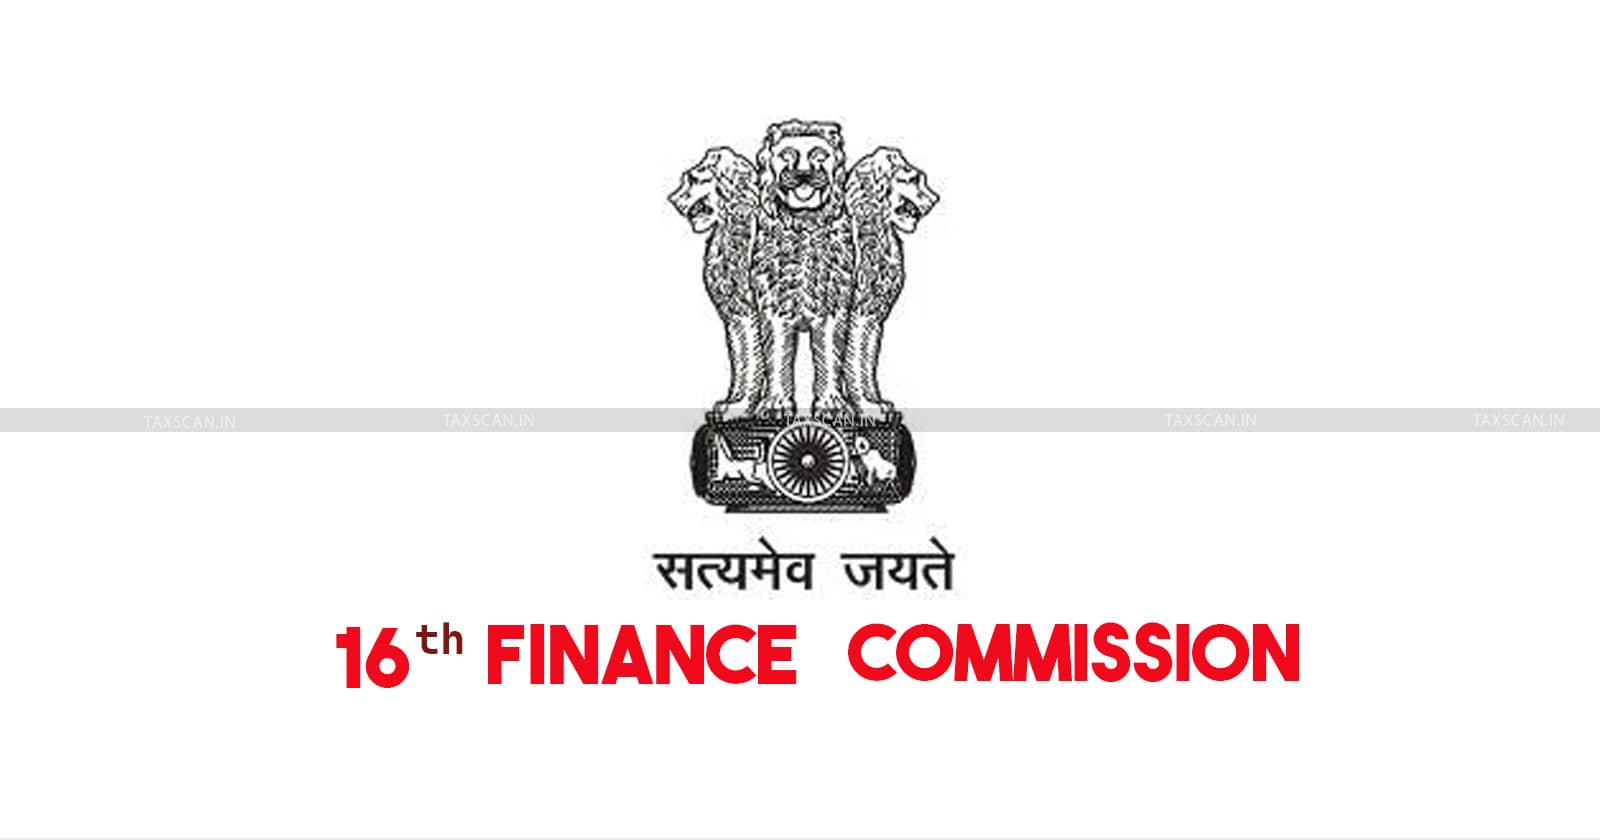 sixteenth-finance-commission-invites-suggestions-on-issues-related-to-its-terms-of-reference